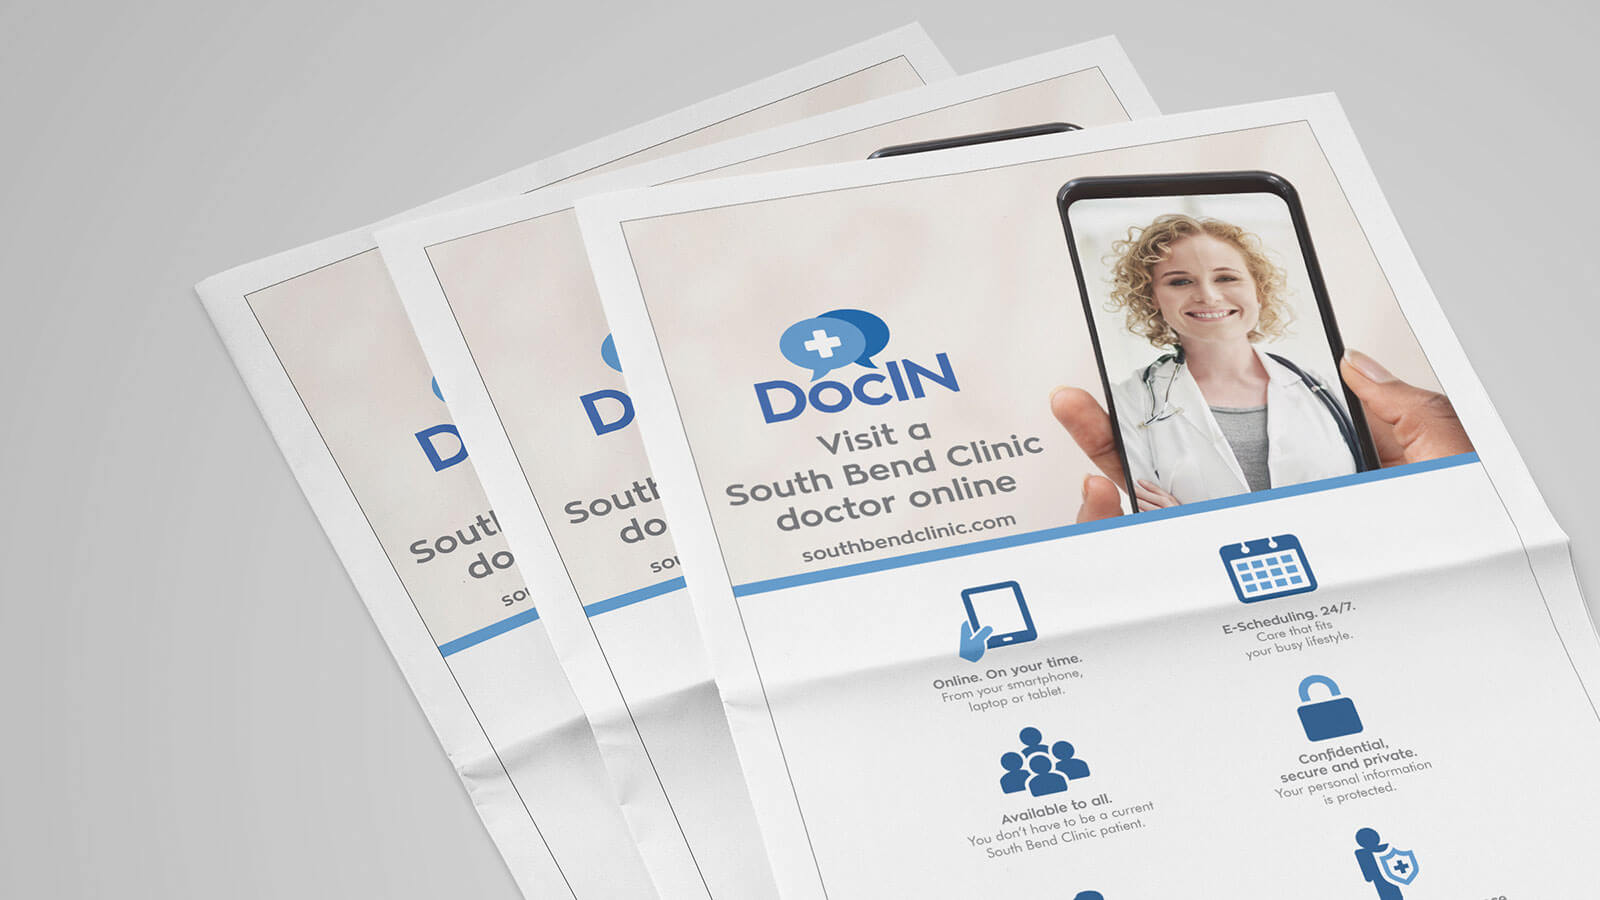 The South Bend Clinic <strong>“DocIN” Online Care Campaign</strong>